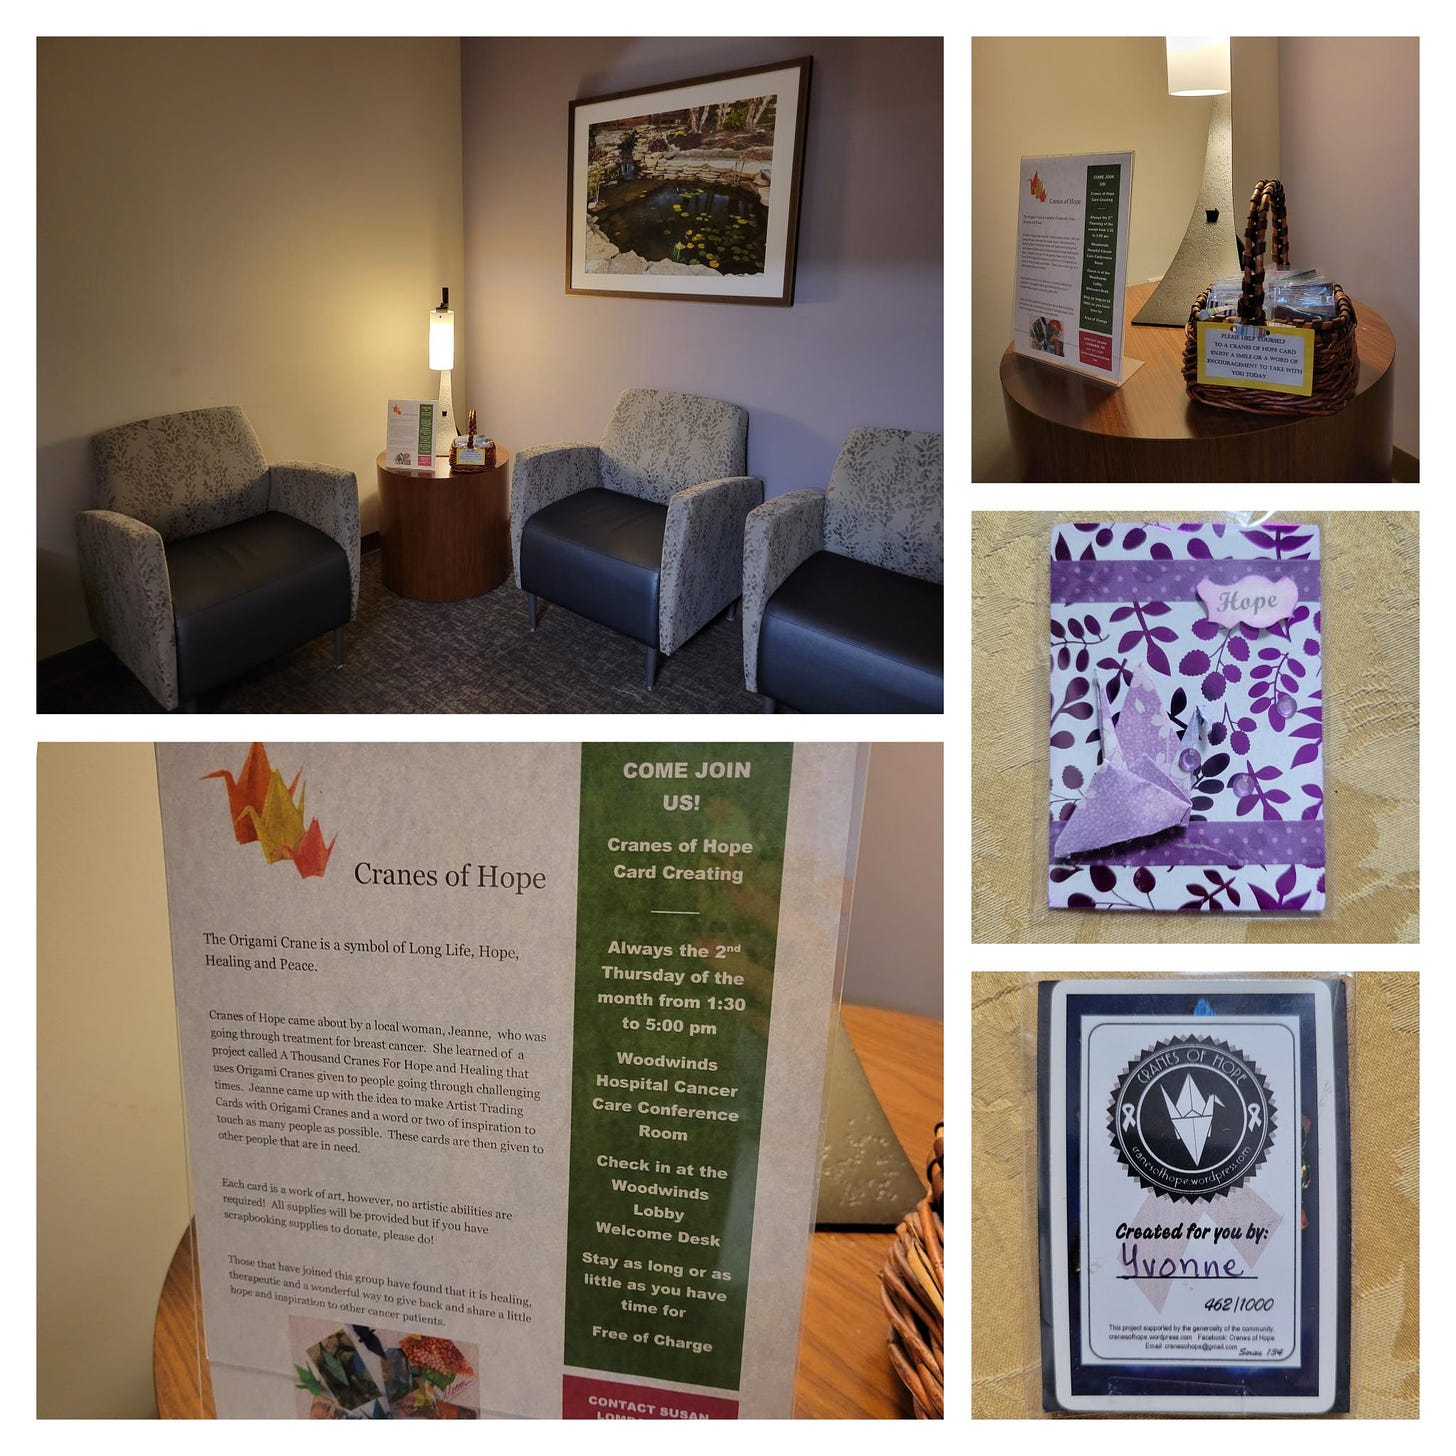 A five photo collage of the private waiting area, the sign about the Cranes of Hope, the sign & basket on the table, and closeups of the front and back of the crane I chose which is purple and white and says Hope on it.